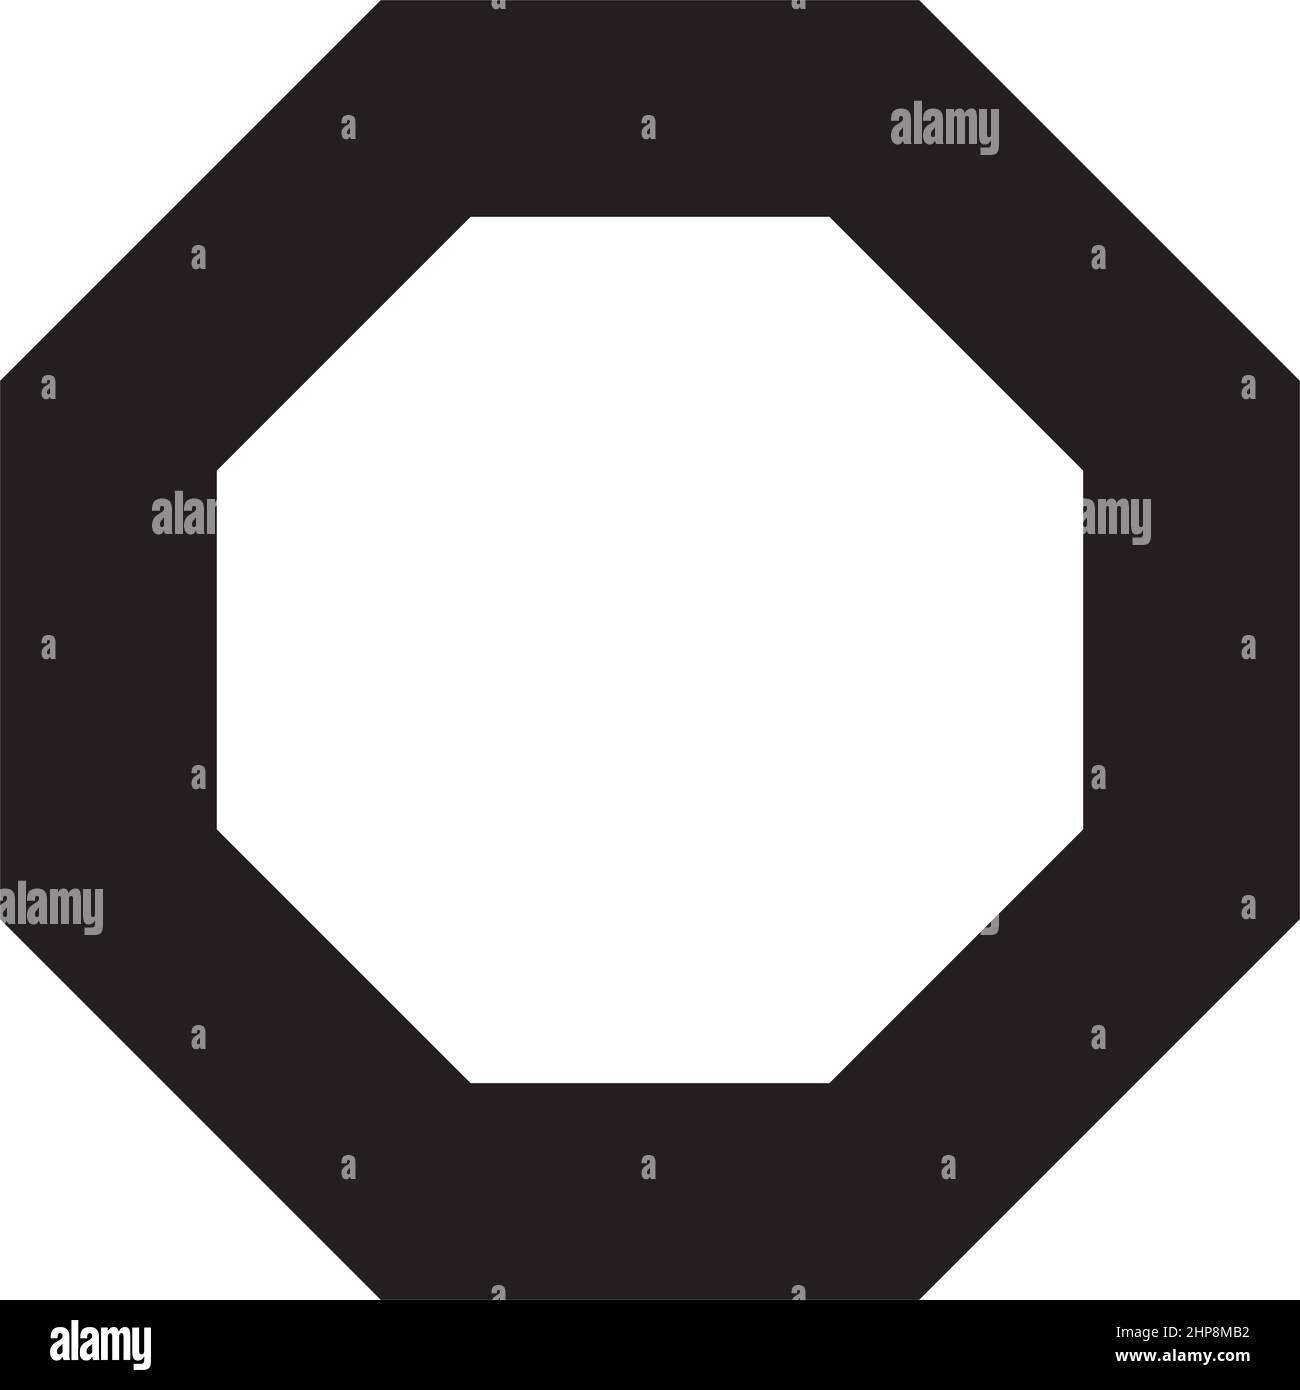 Octagon symbol shape vector icon for creative graphic design ui element in a pictogram illustration Stock Vector